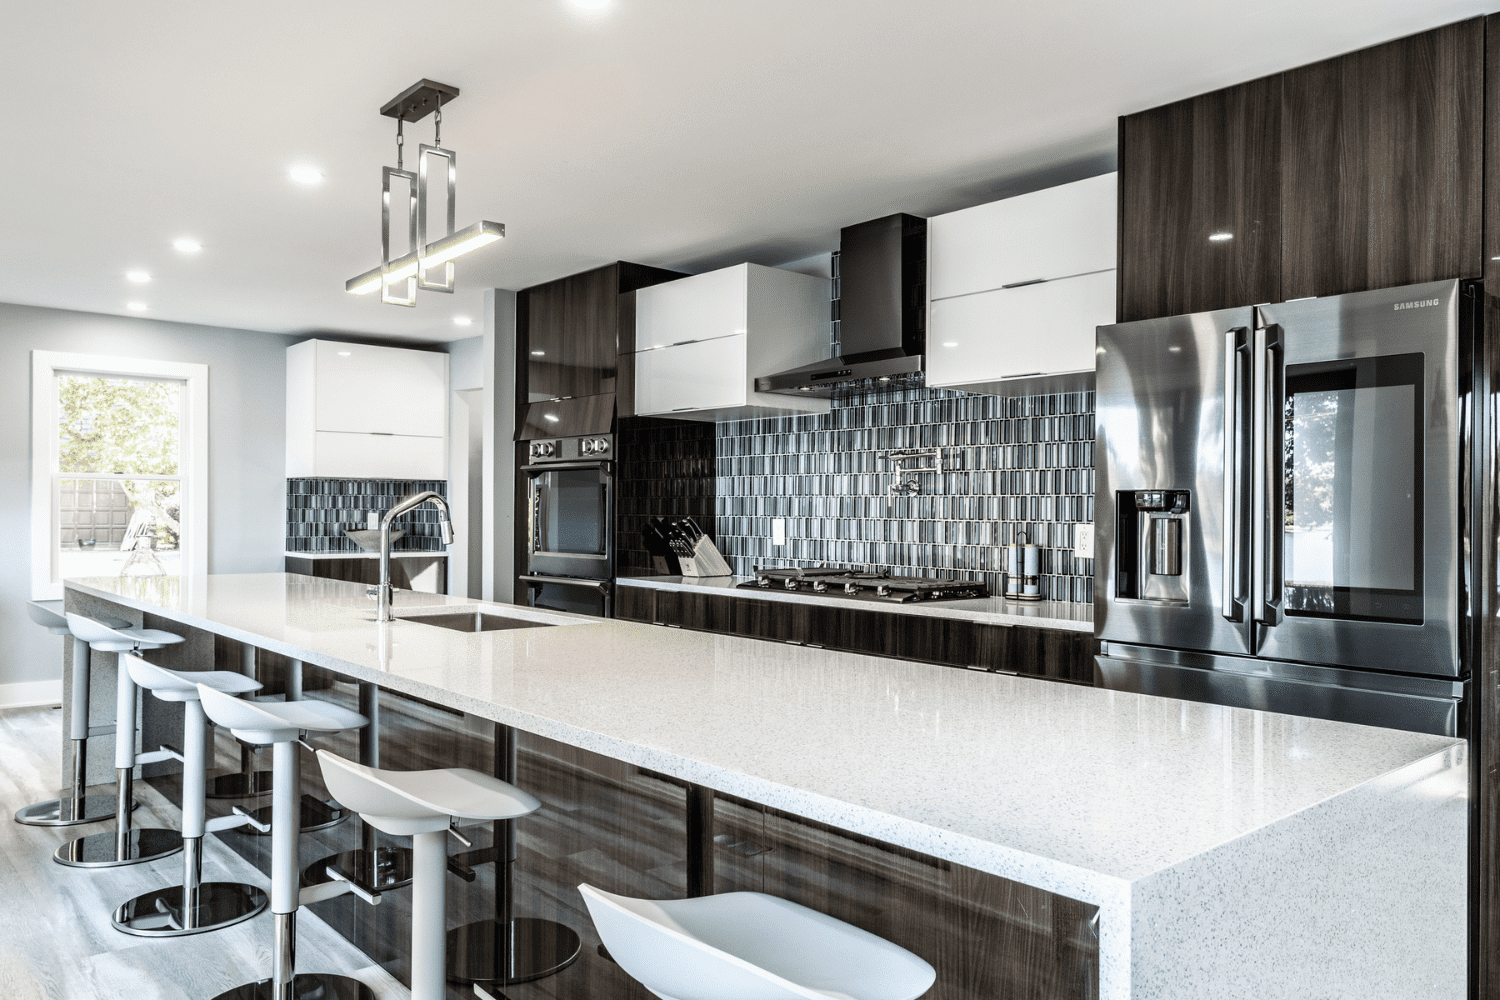 Nicholas Design Build | A modern kitchen with stainless steel appliances and bar stools.